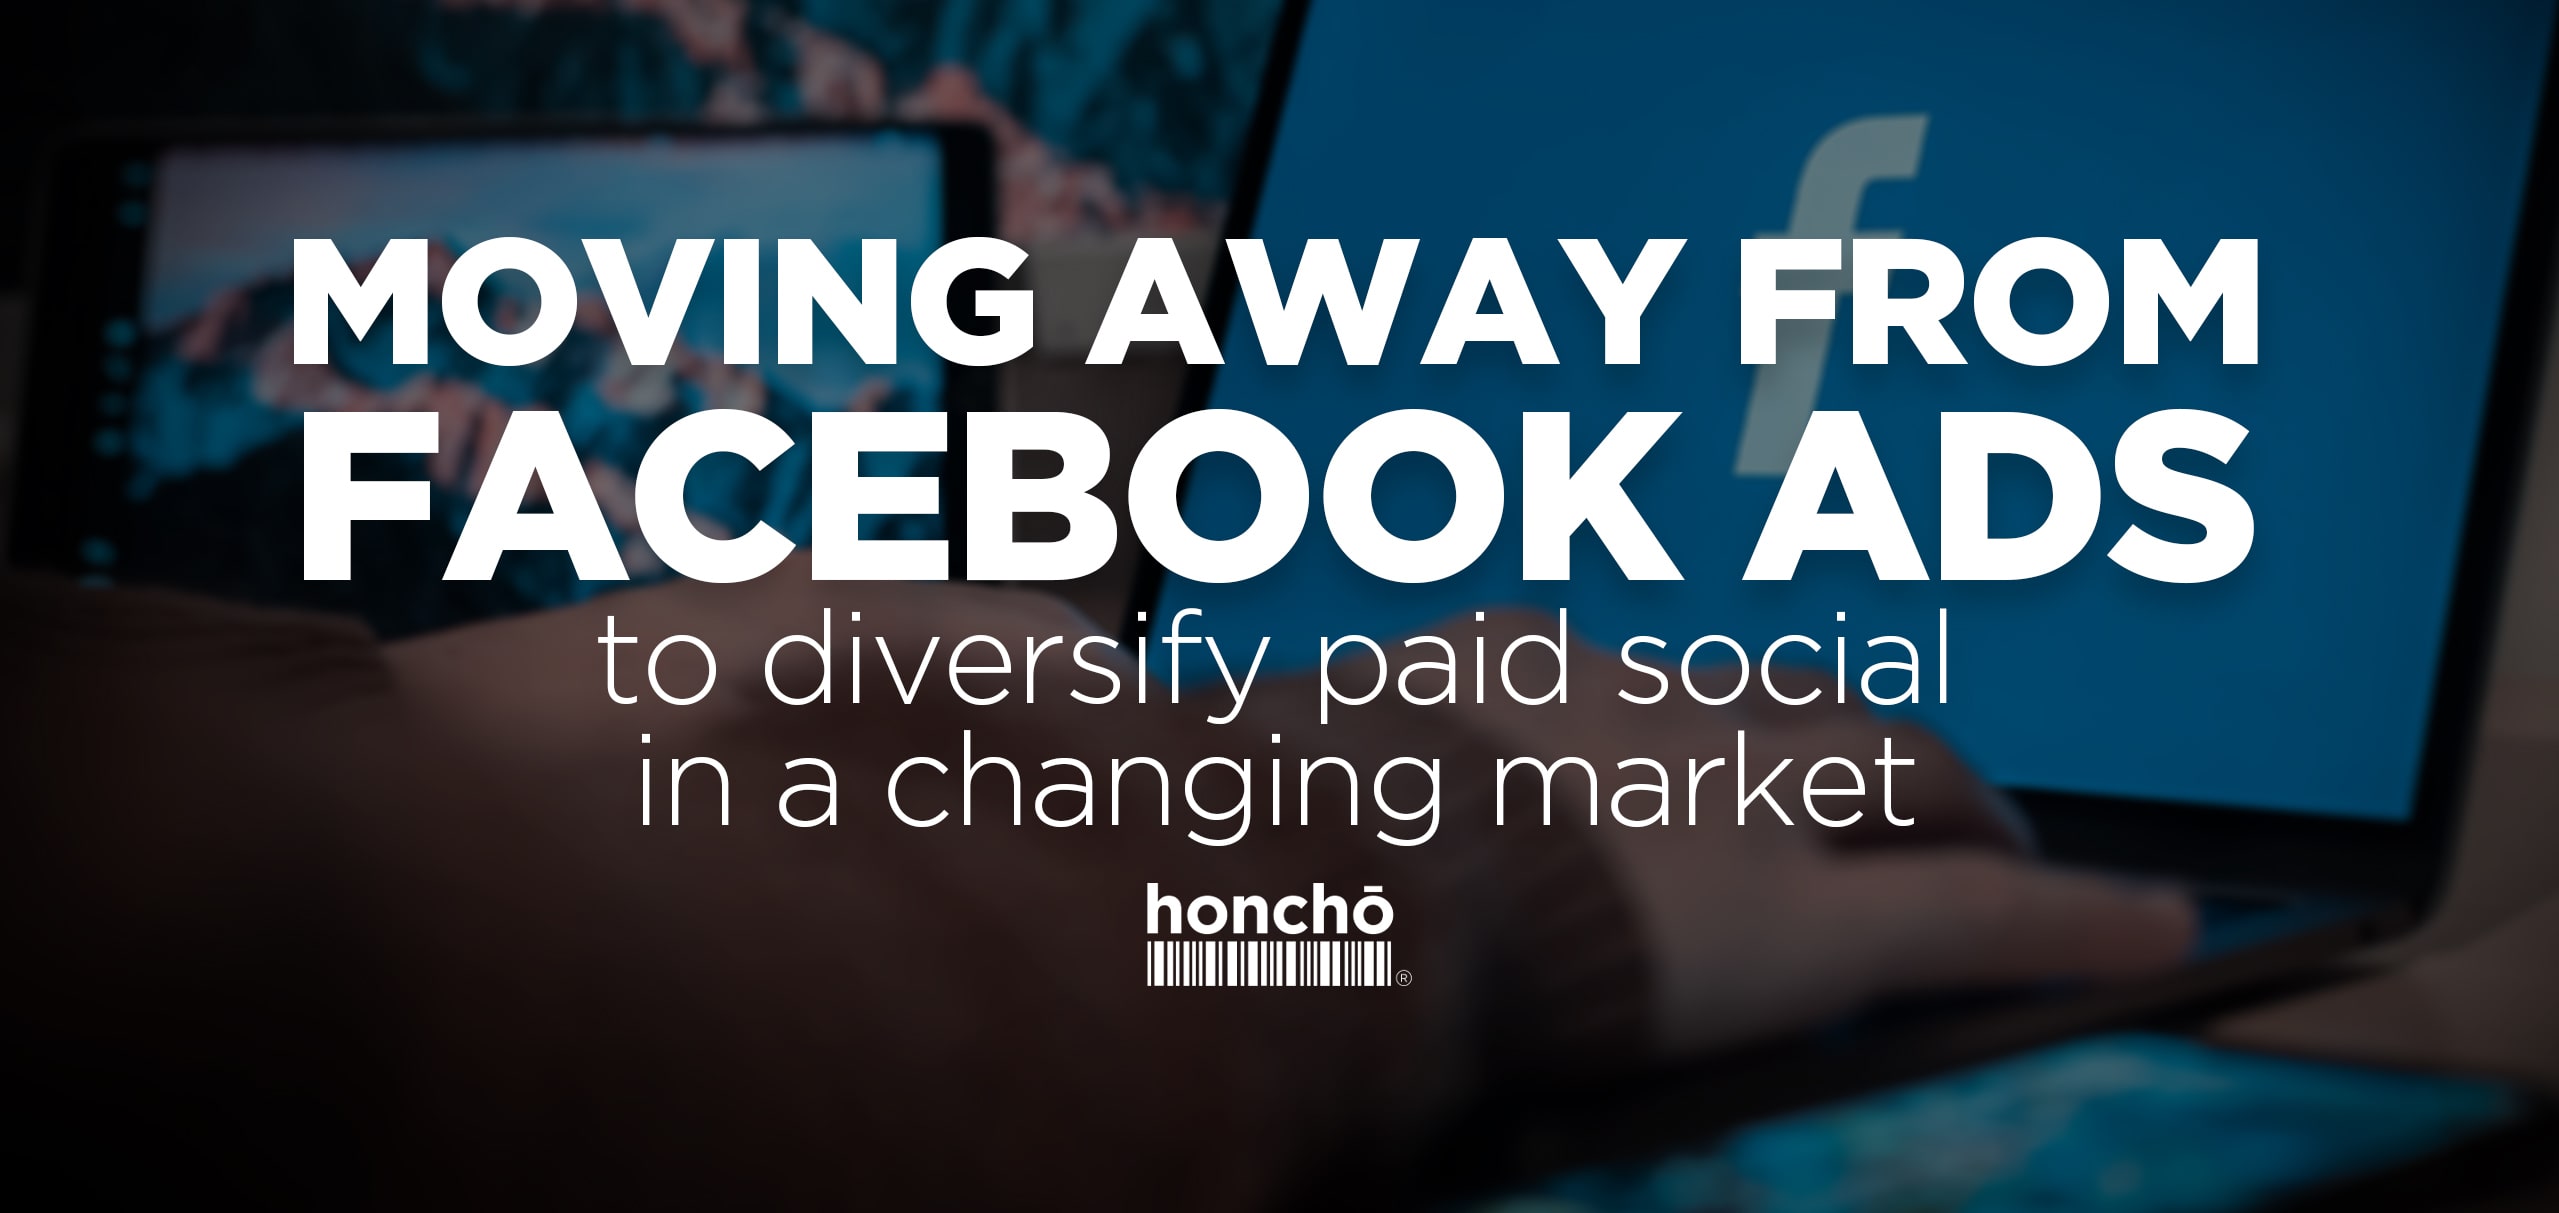 Moving away from Facebook ads to diversify paid social in a changing market